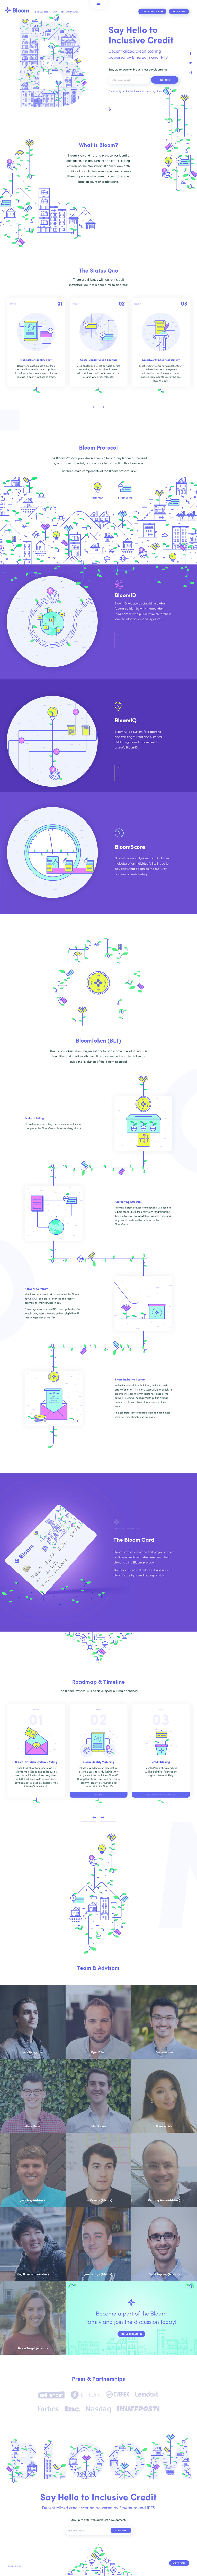 Bloom Landing Page Example: Decentralized credit scoring powered by Ethereum and IPFS. Bloom is an end-to-end protocol for identity attestation, risk assessment and credit scoring, entirely on the blockchain.